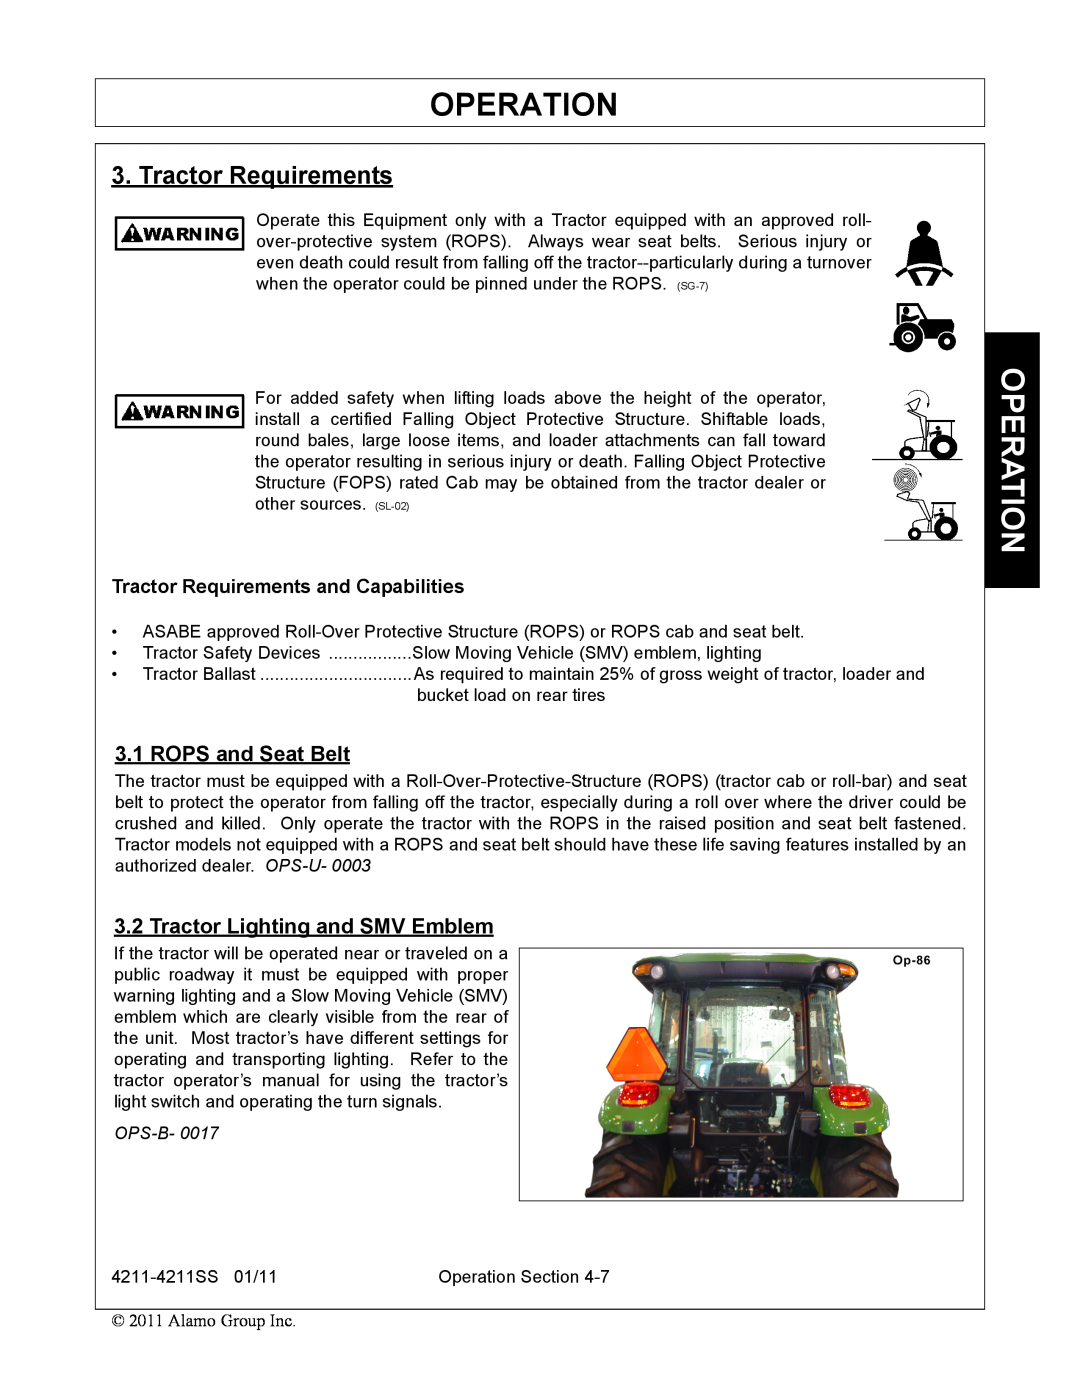 Servis-Rhino 4211SS manual Operation, Tractor Requirements, ROPS and Seat Belt, Tractor Lighting and SMV Emblem 